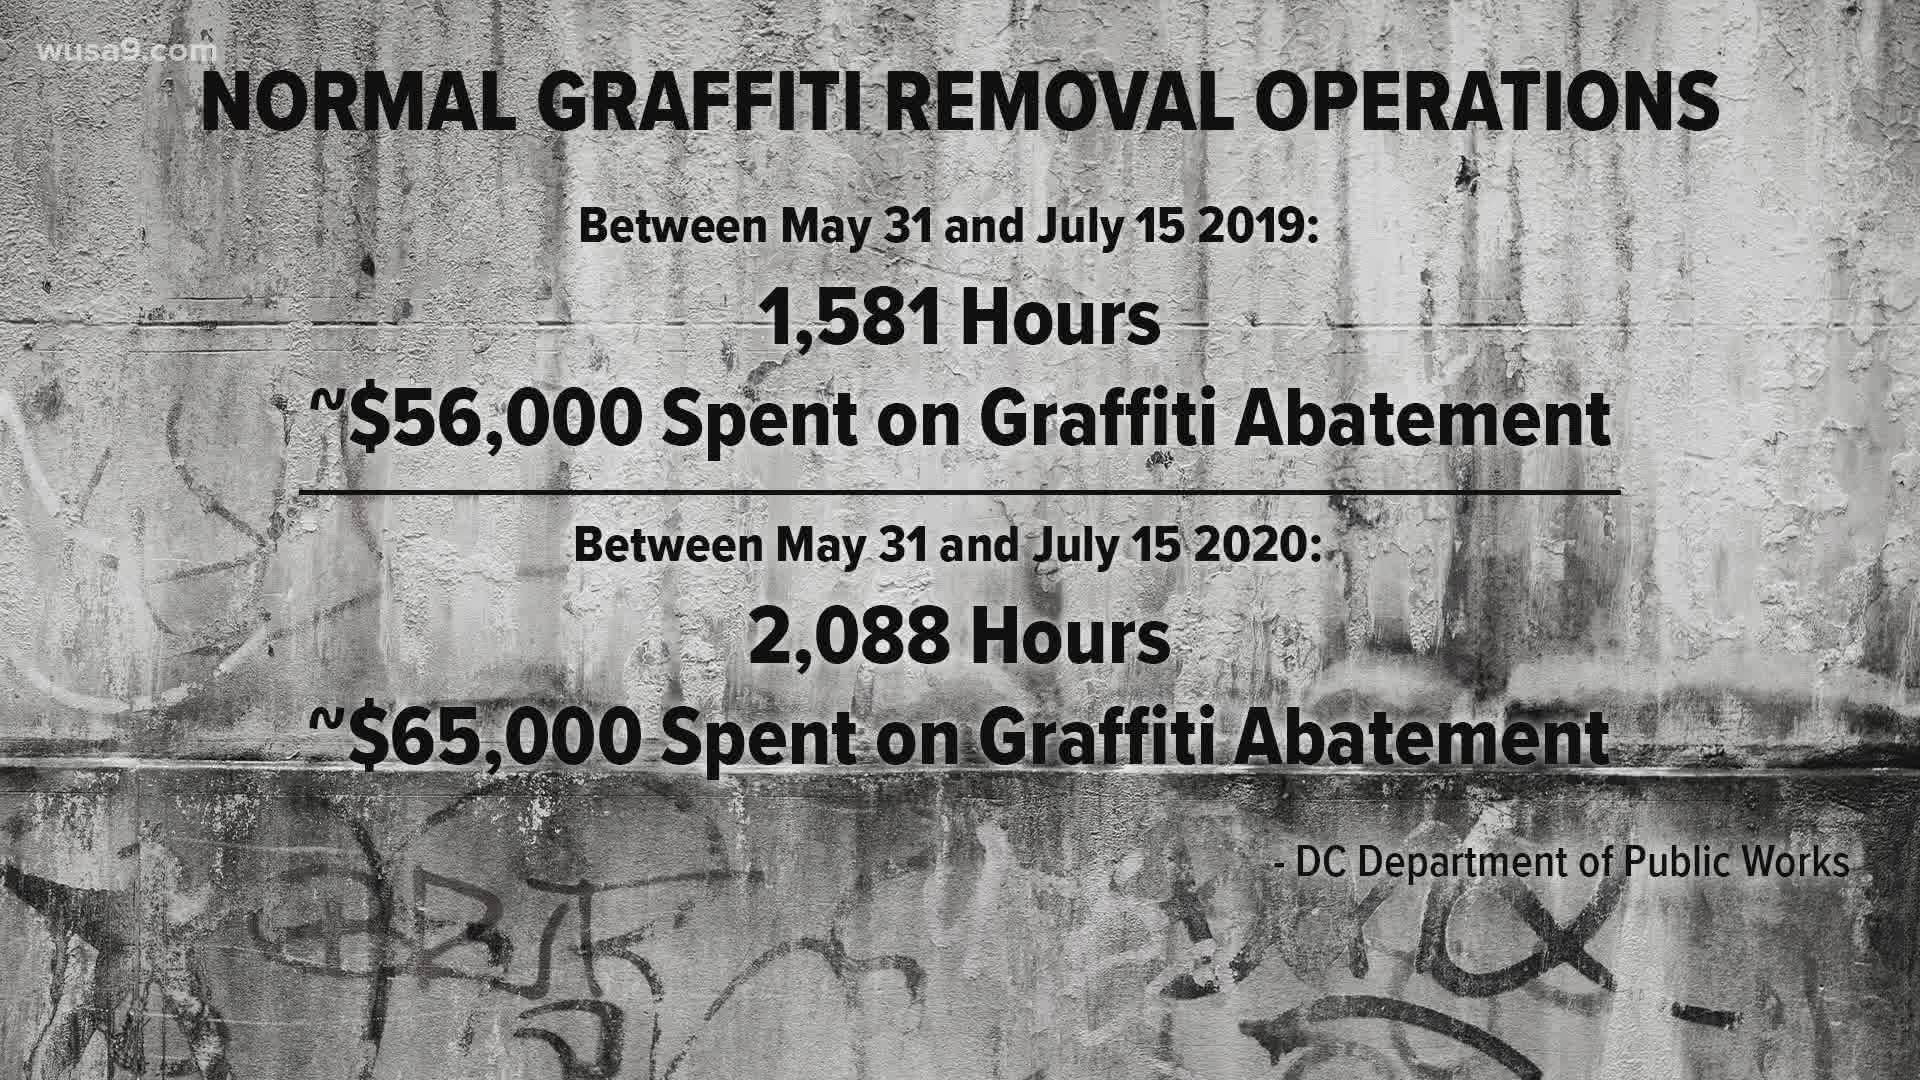 Graffiti clean-up following Black Lives Matter Protests have cost DC at least $35,000.